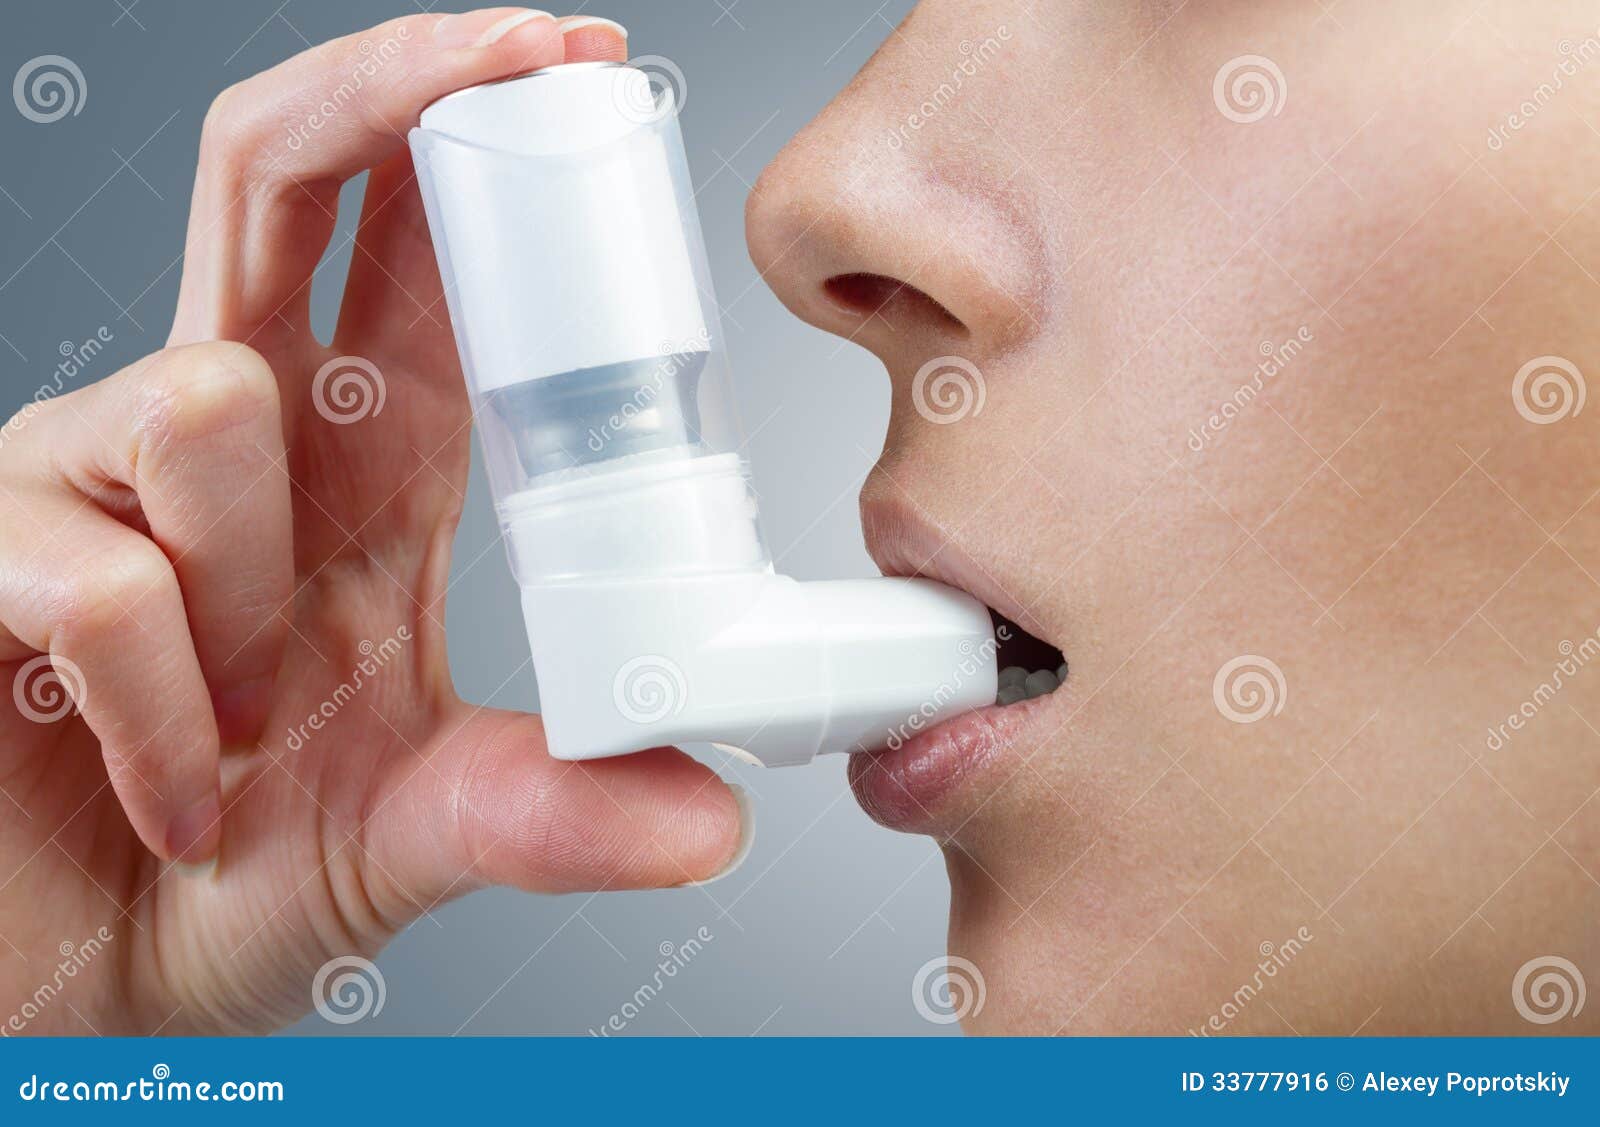 treatment during an asthma attack